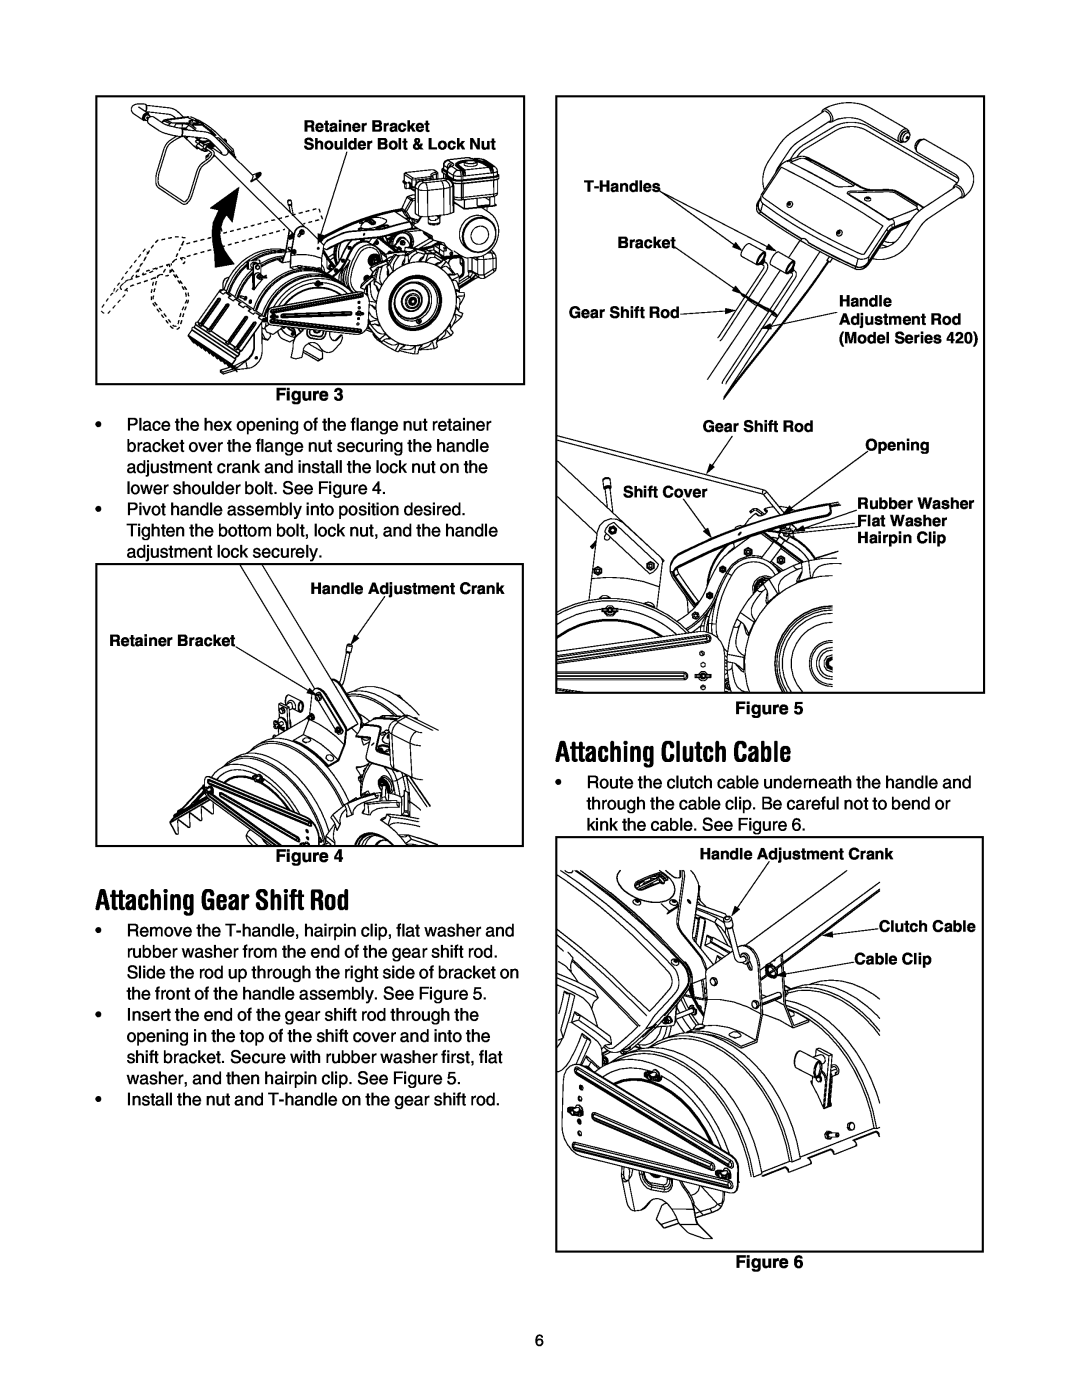 MTD 410 Series manual Attaching Gear Shift Rod, Attaching Clutch Cable 